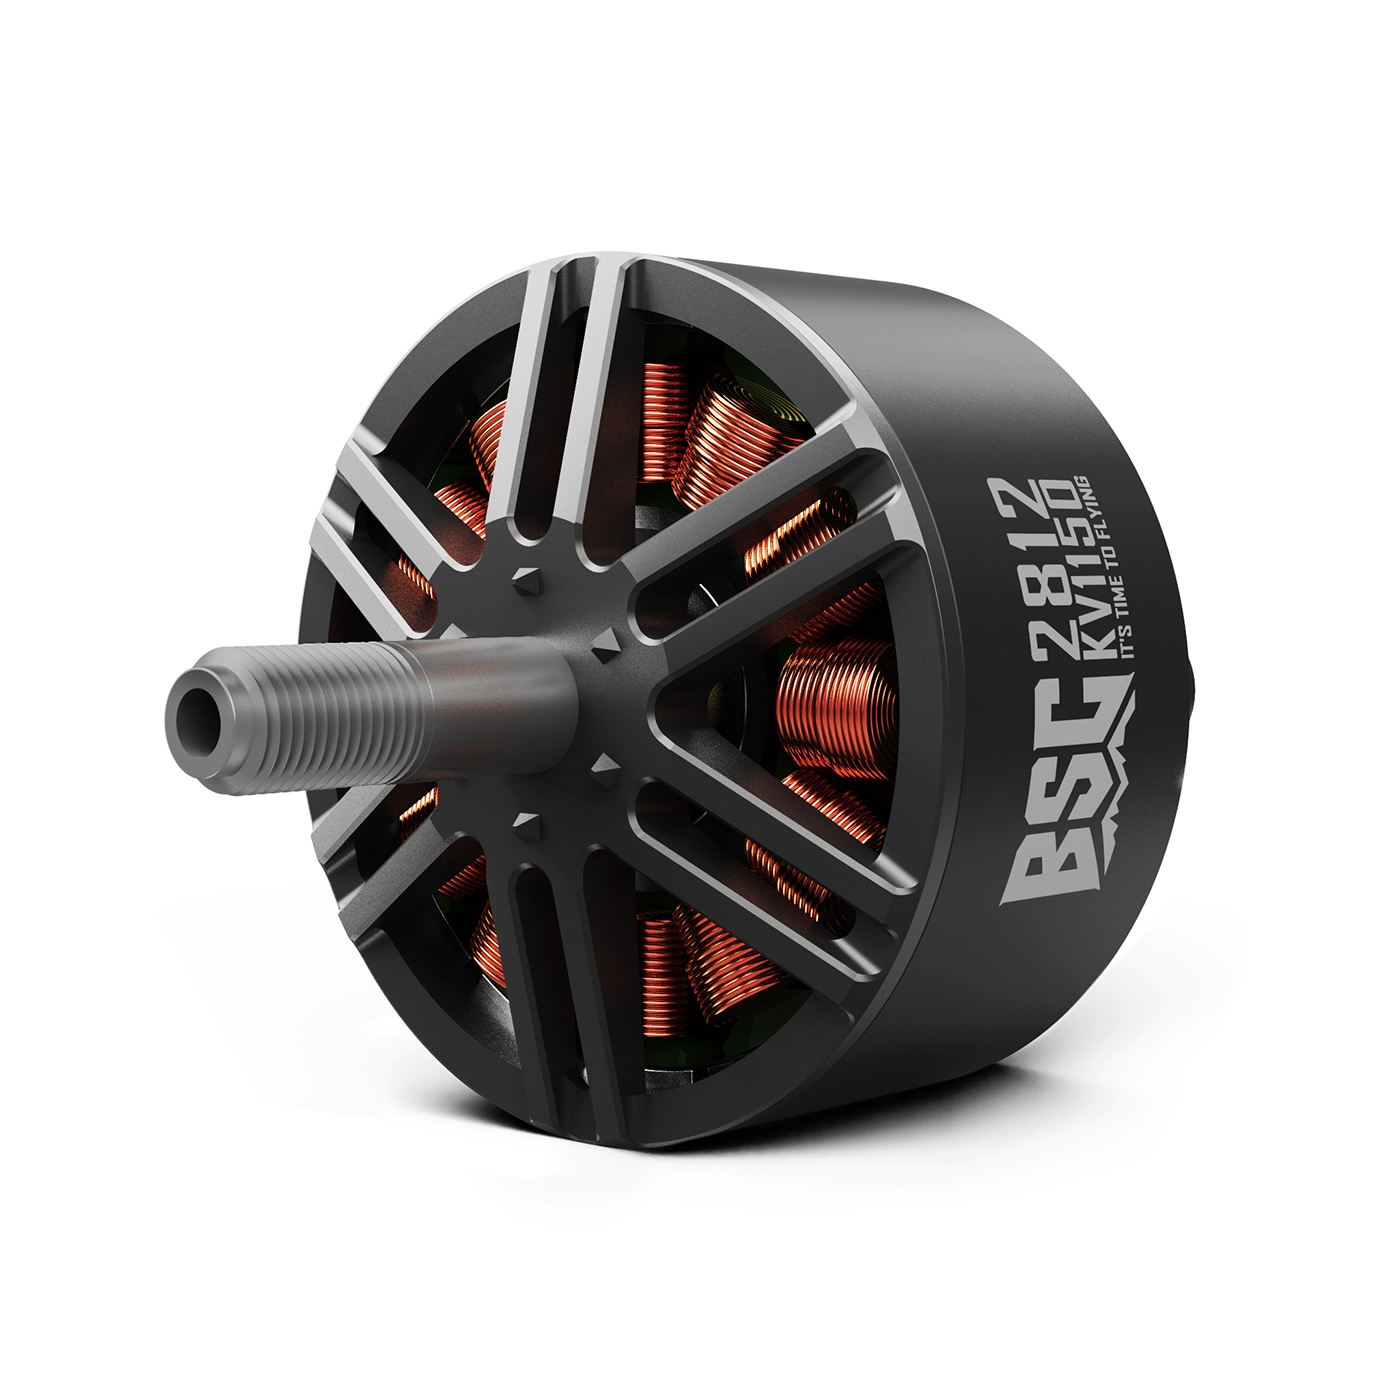 MAD BSC2812 Brushless motor for 10-11inch long range FPV drone/9-10inch X8 Cinelifter drone